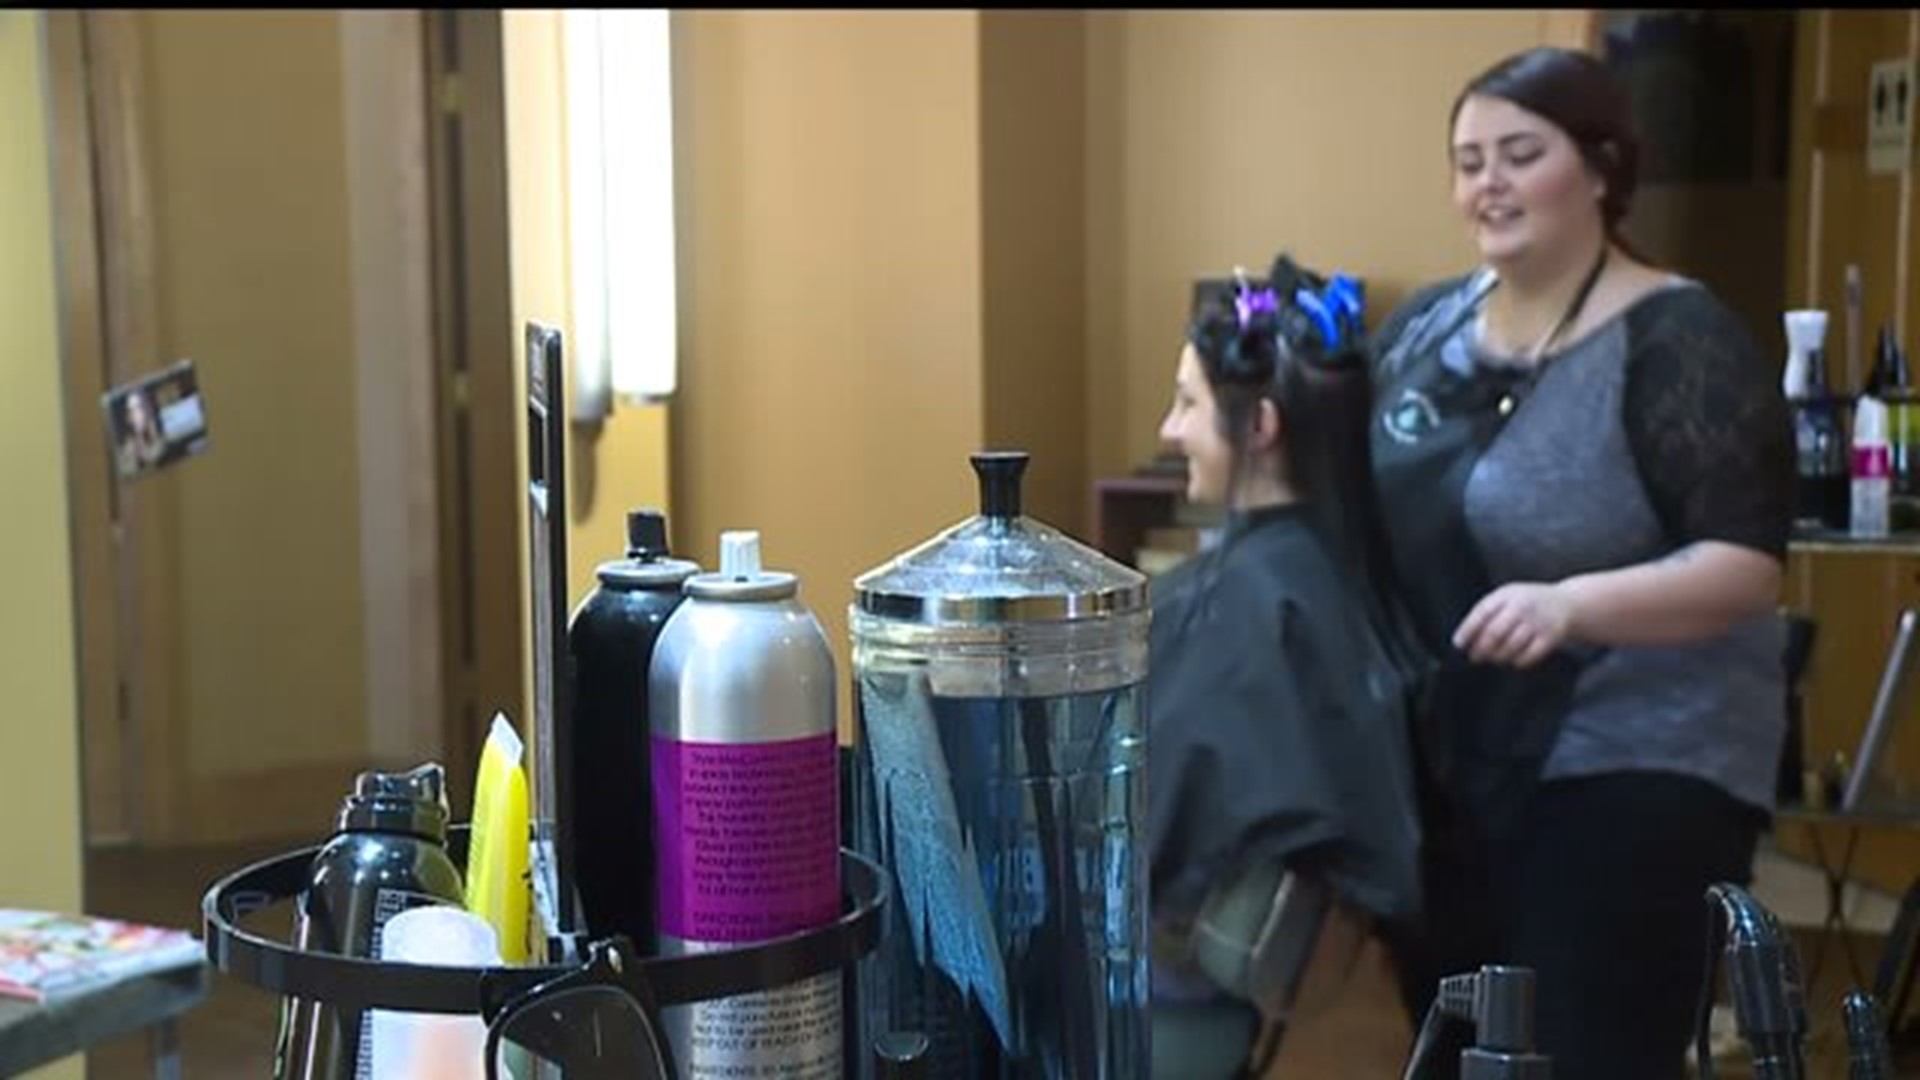 Hairdressers Train to Recognize Abuse